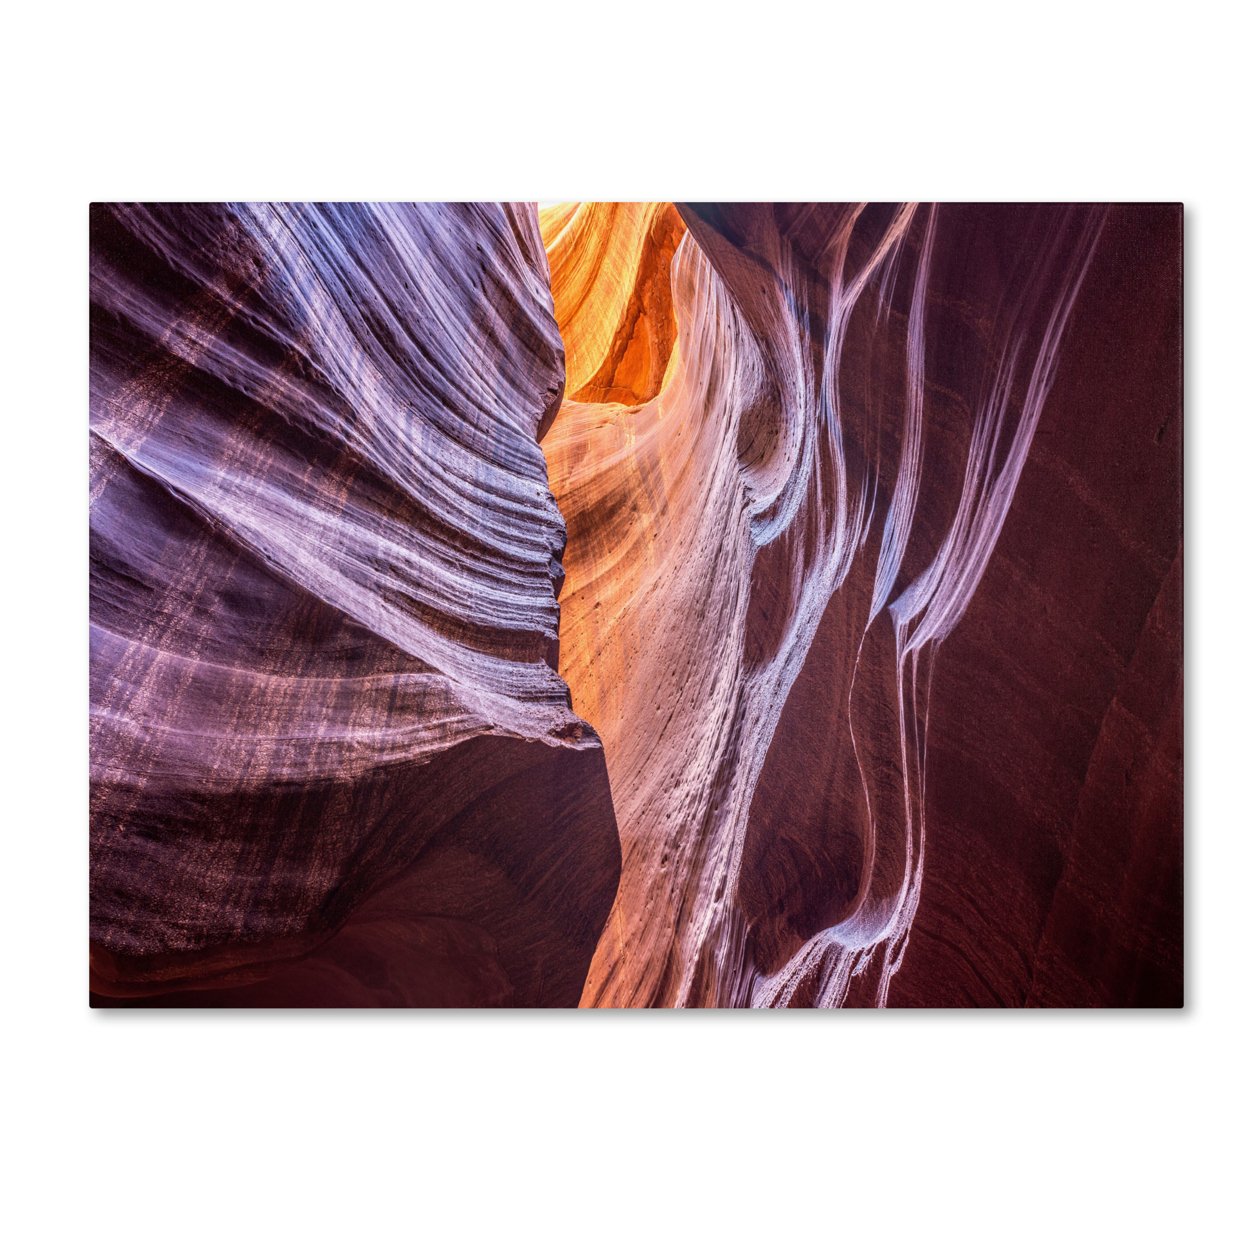 Pierre Leclerc 'Canyon Abstract' Canvas Wall Art 35 X 47 Inches